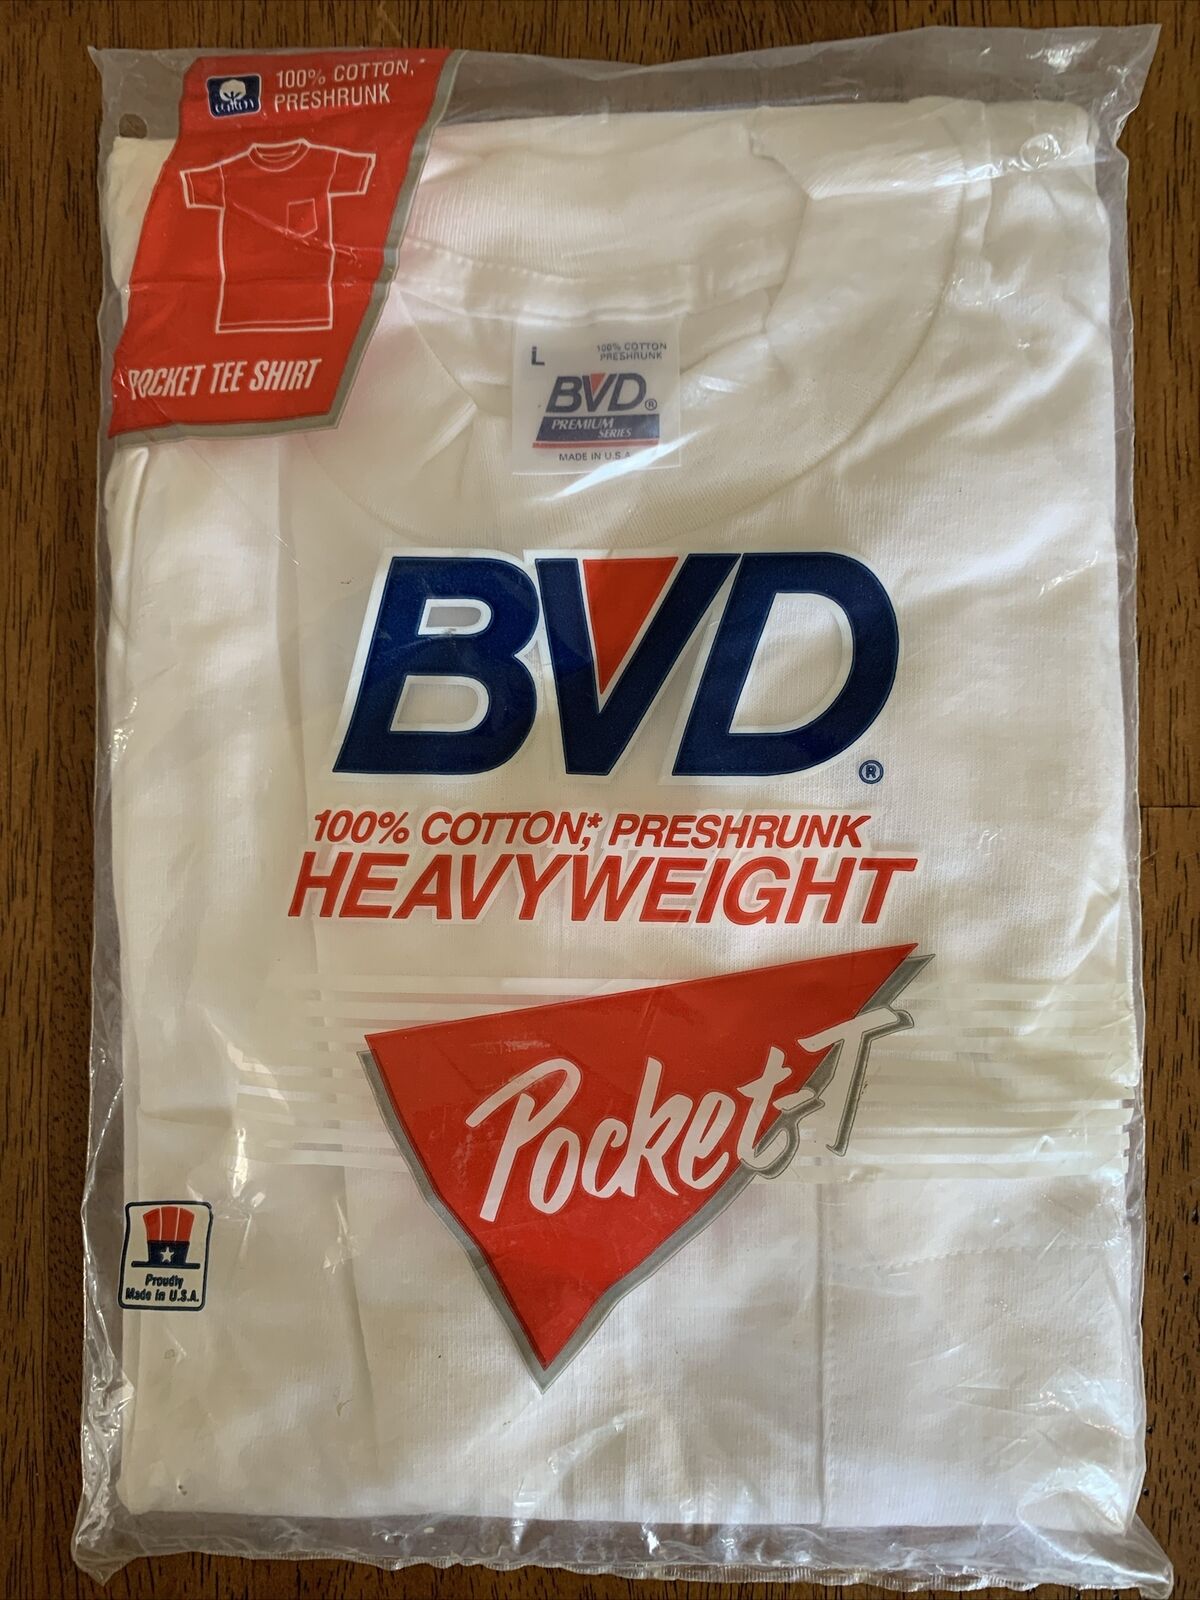 NEW NOS VINTAGE 1990 BVD HEAVYWEIGHT POCKET T SHIRT WHITE SIZE L MADE IN USA